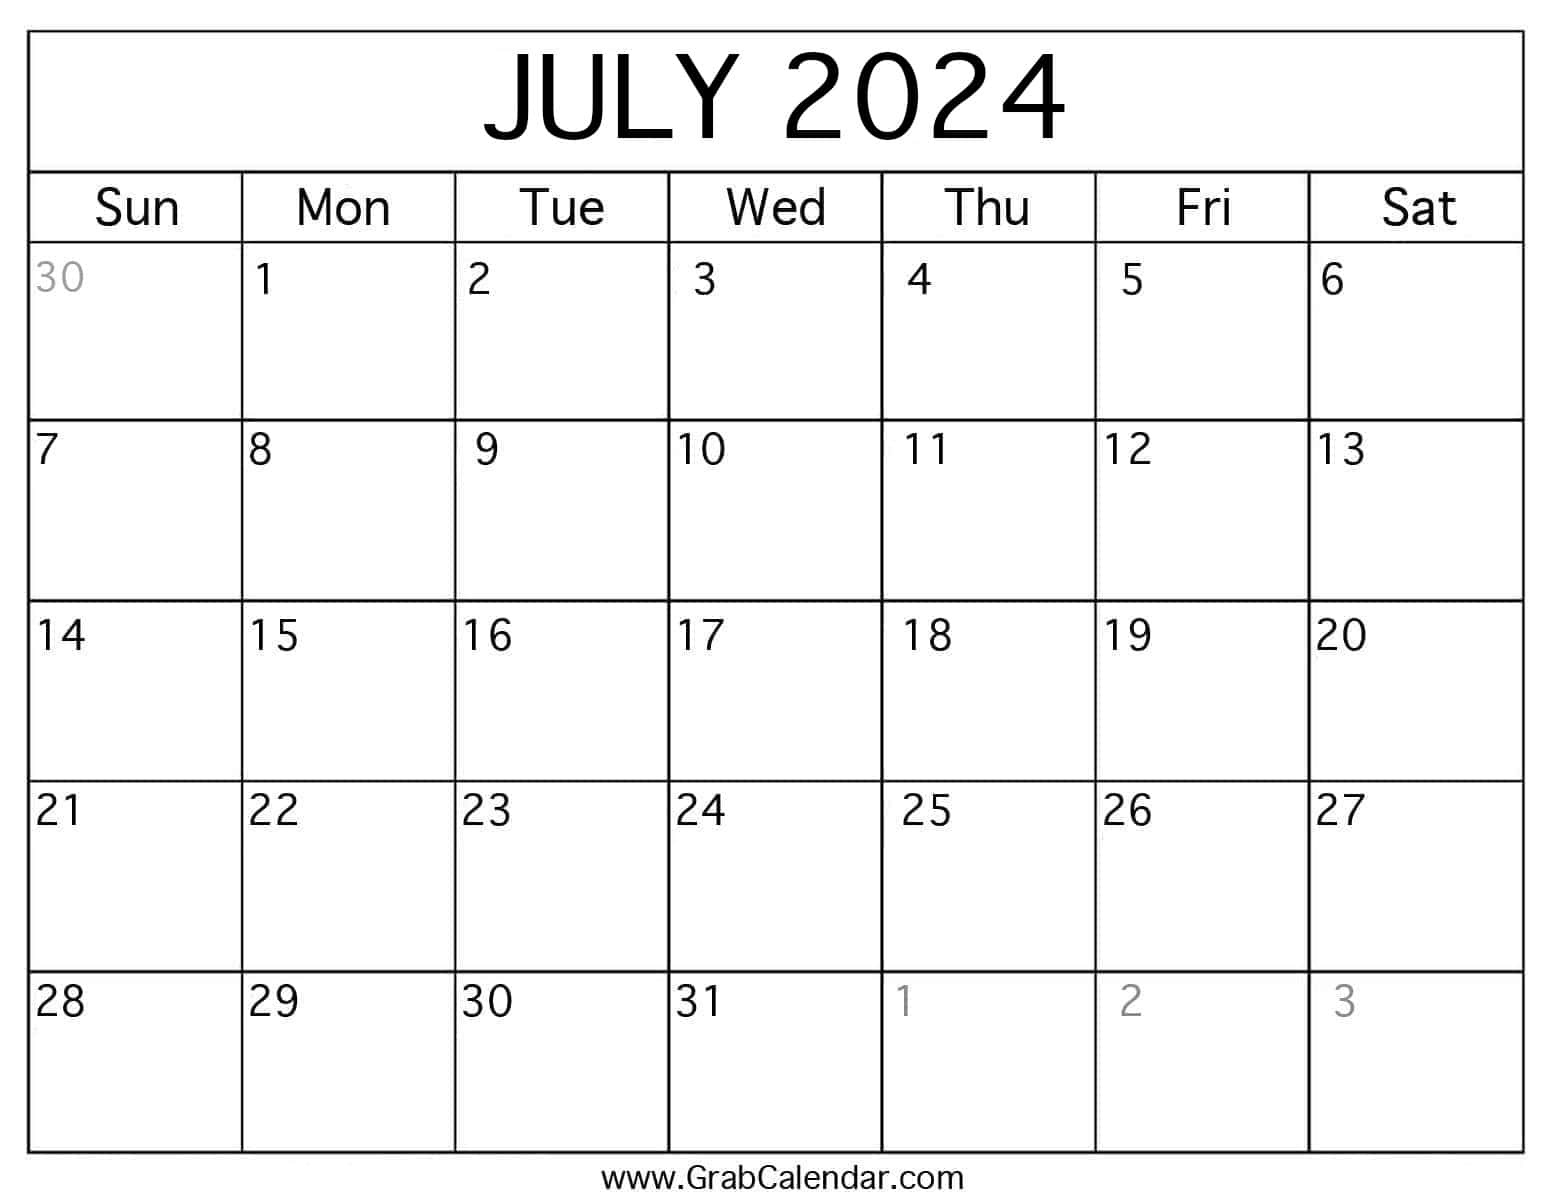 Printable July 2024 Calendar regarding Give Me the Calendar For the Month of July 2024